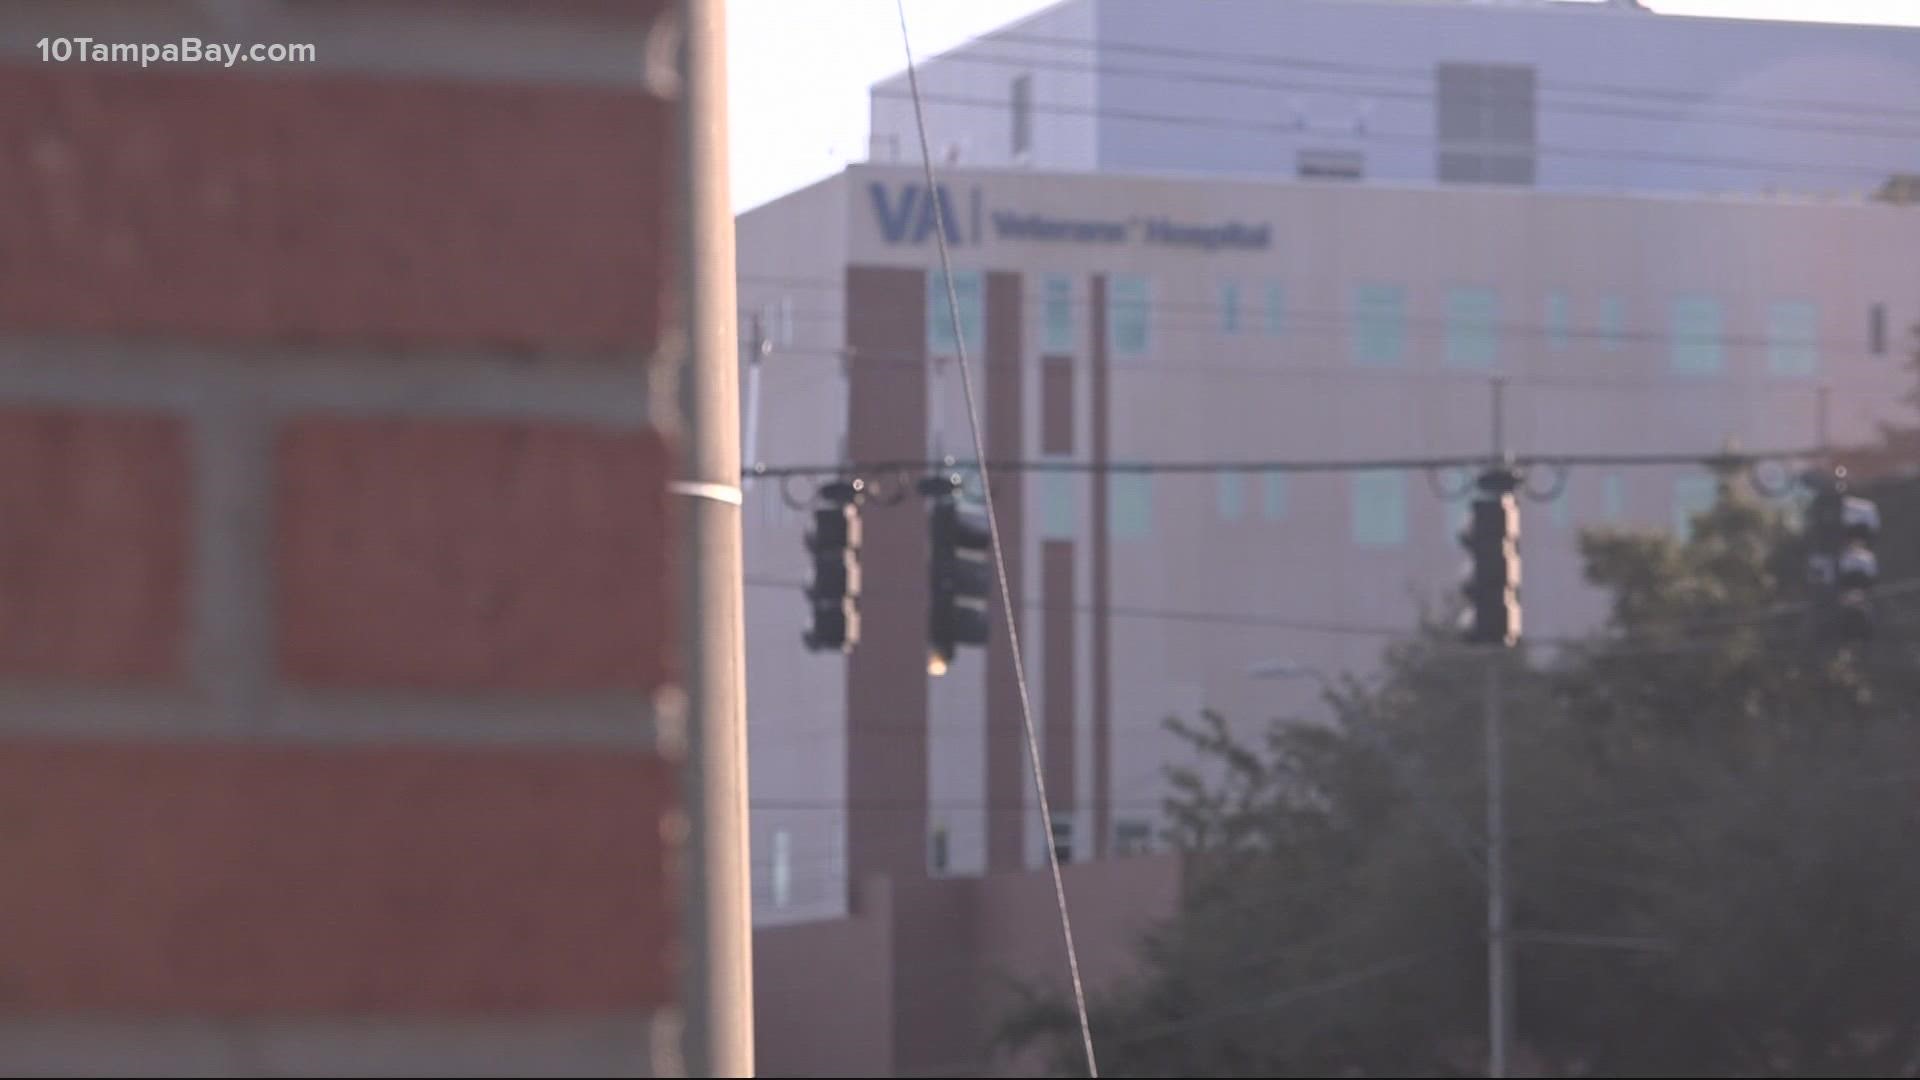 A spokesperson for the James A. Haley Veterans' Hospital confirmed a patient tested positive for the variant.